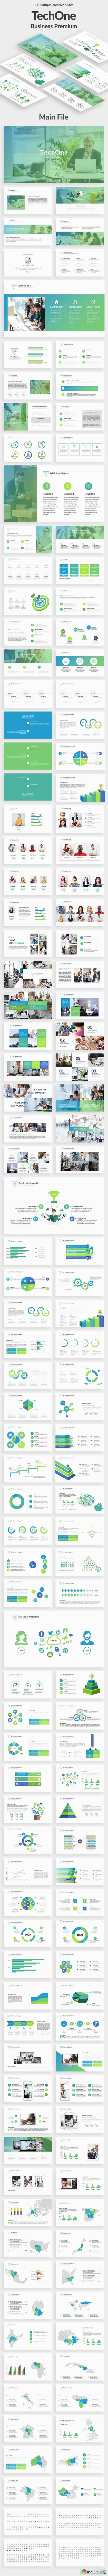 TechOne Business Powerpoint Template